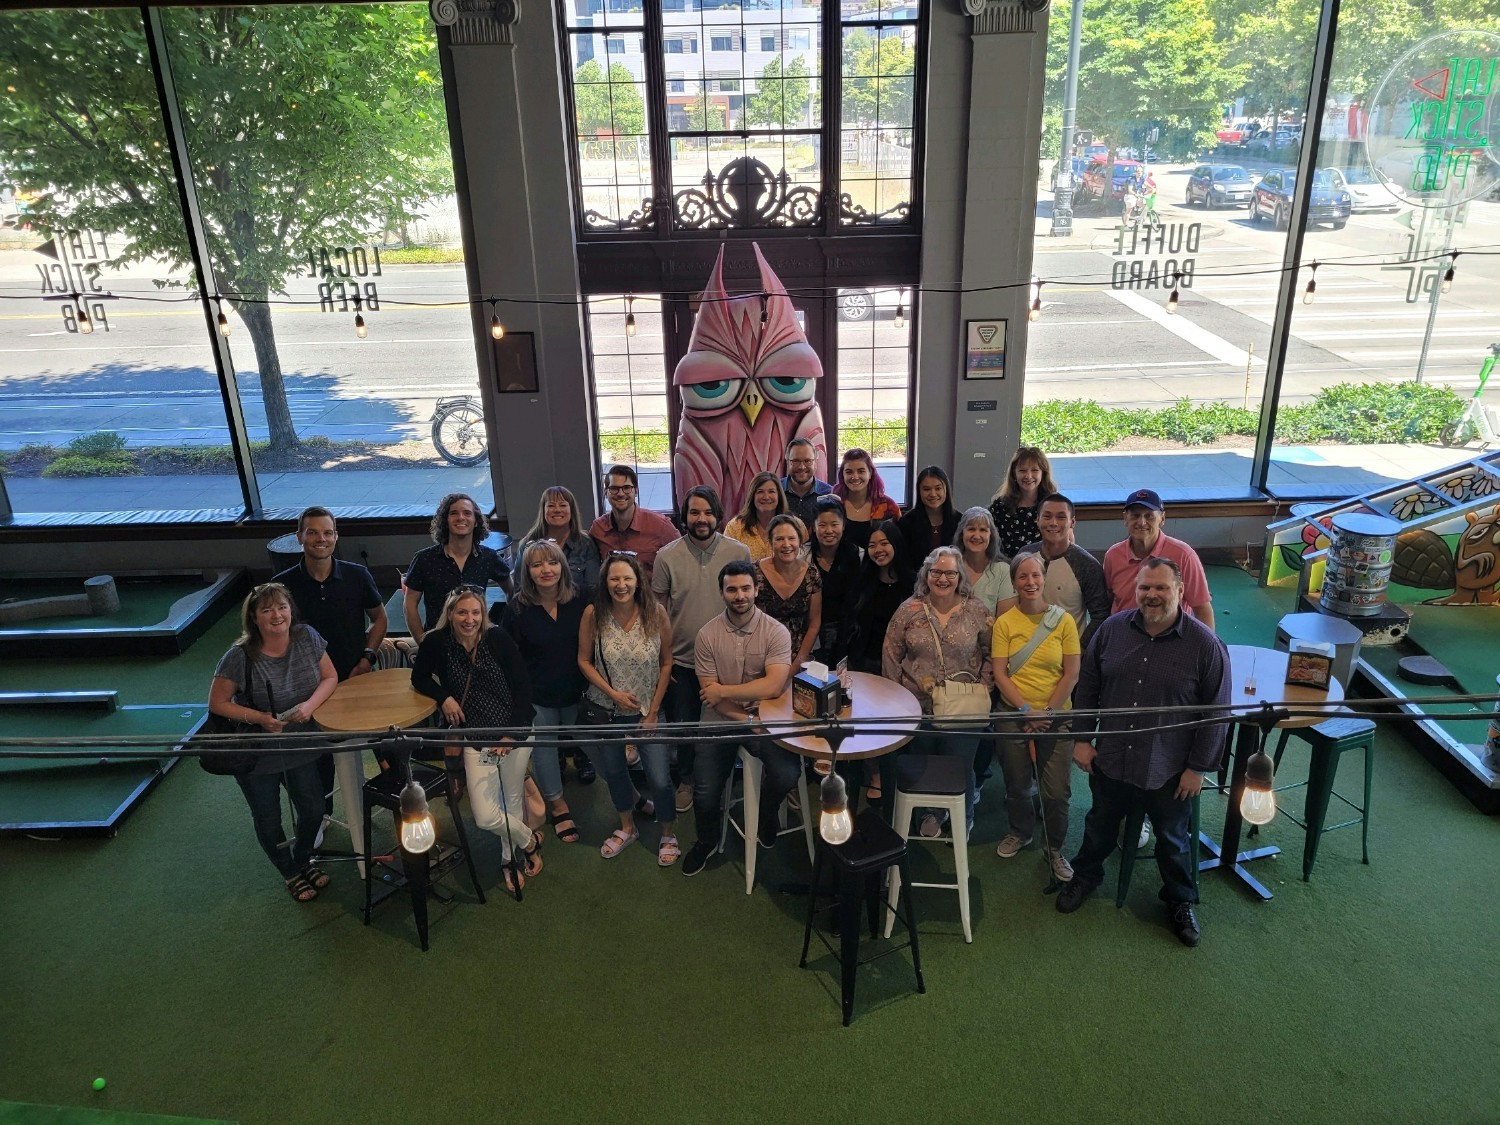 Admiral's Seattle office celebrated National Intern Day by playing indoor mini golf with our interns